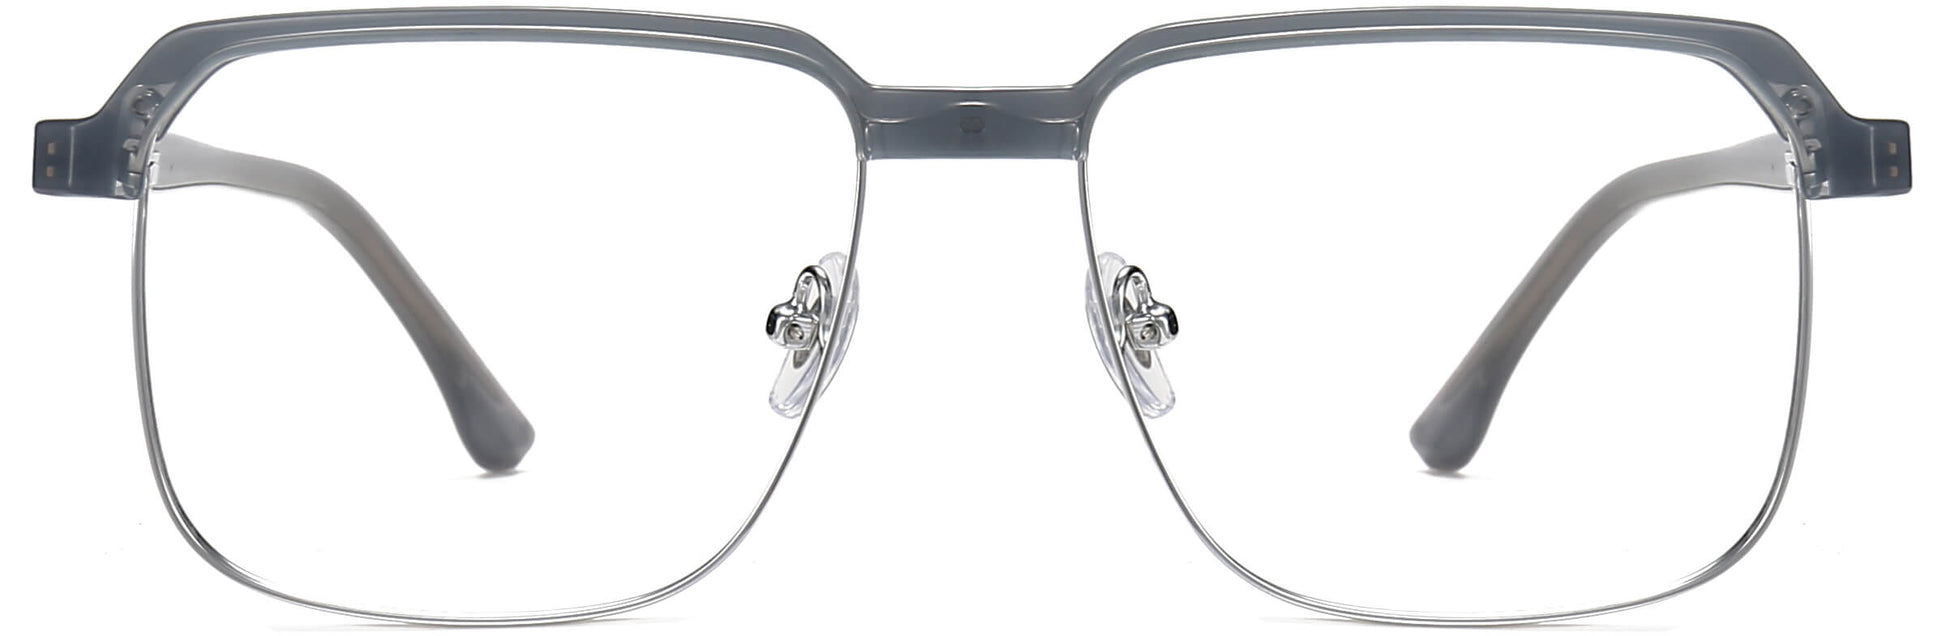 Zeke Square Gray Eyeglasses from ANRRI, front view